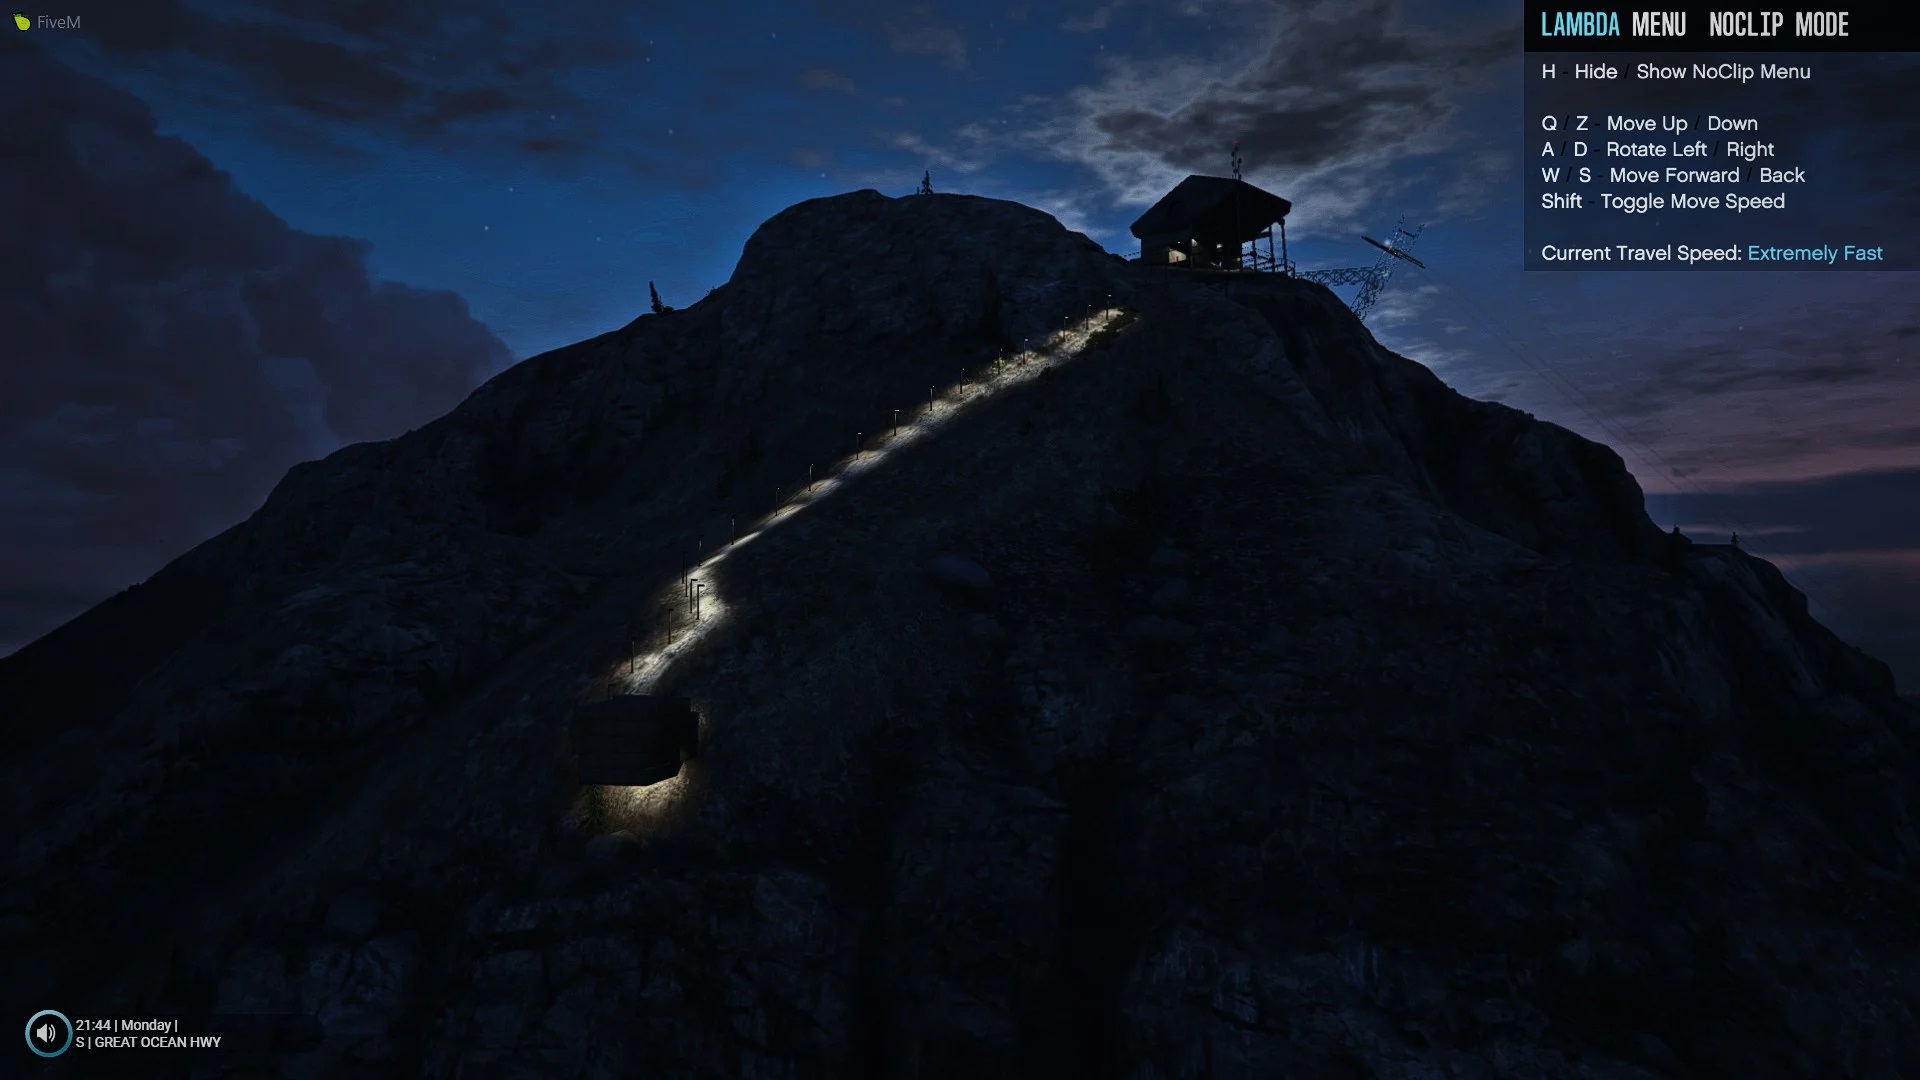 House At Mount Chiliad Mapeditor Fivem 1 0 Gta5mod Net Rescans the resources folder and loads all resource manifests in them. house at mount chiliad mapeditor